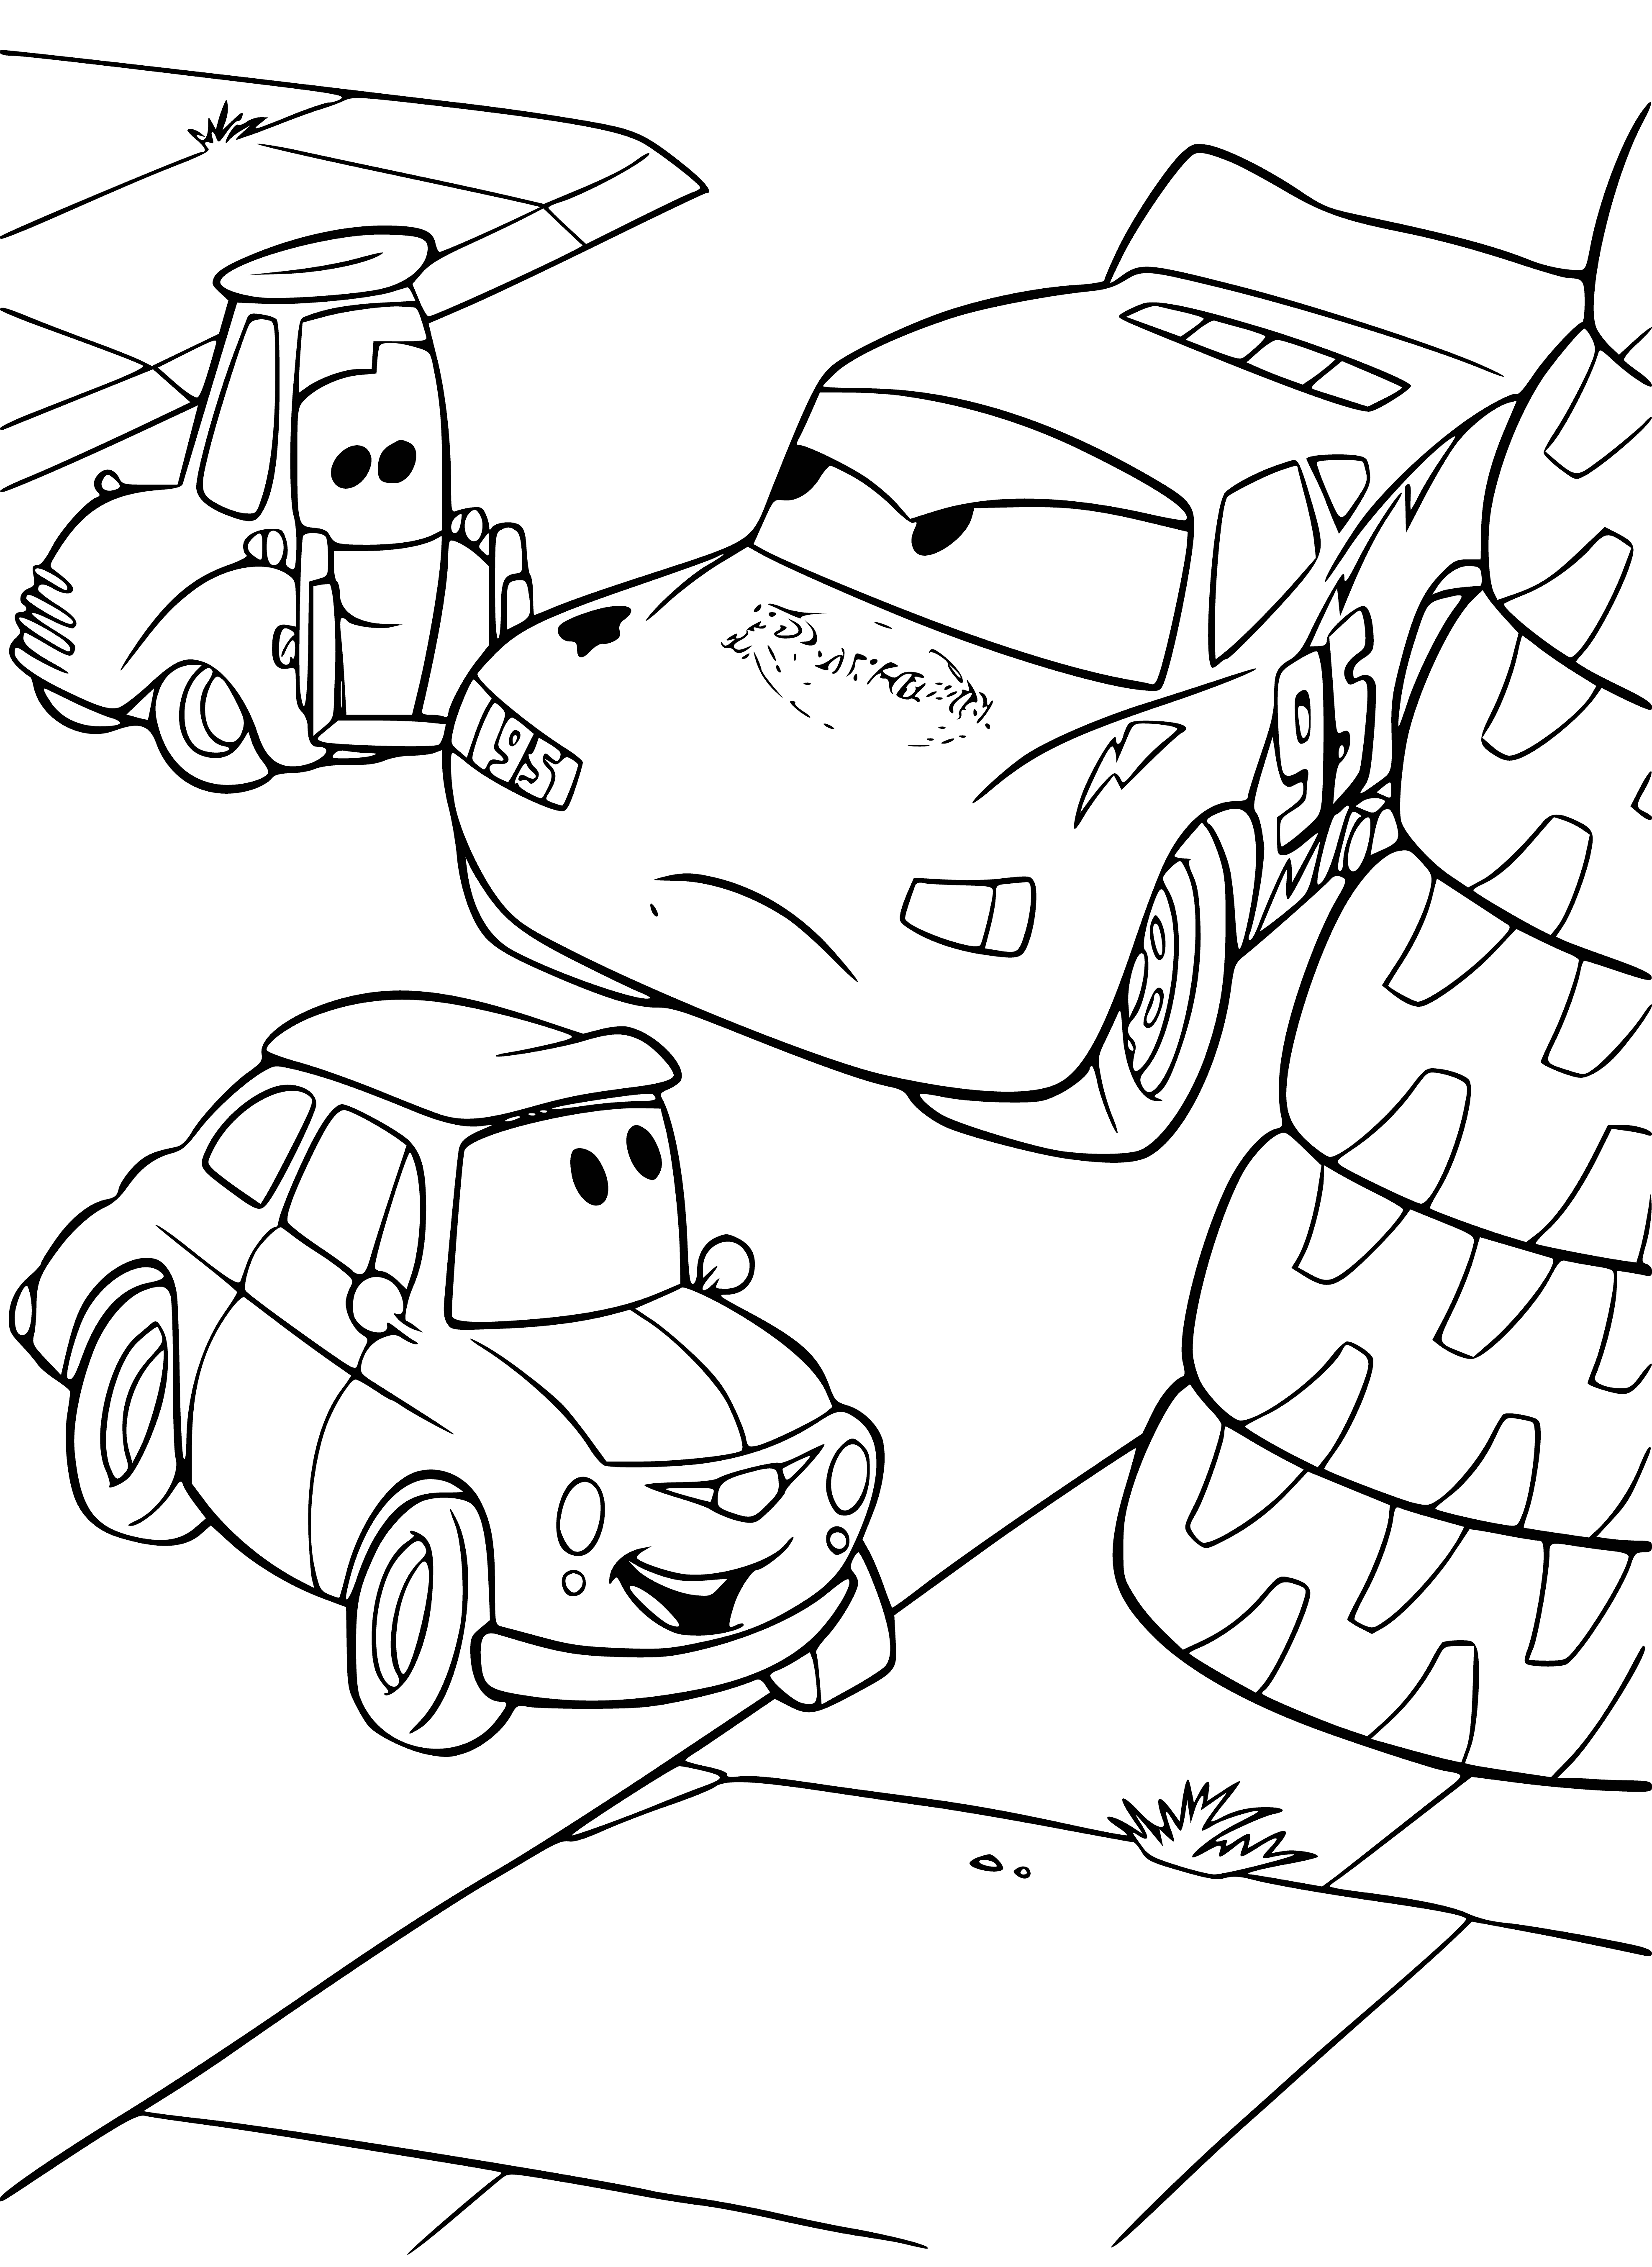 coloring page: Car has 4 wheels, 4 doors, grill & headlights (front) & tail lights & exhaust pipes (back). #summarize